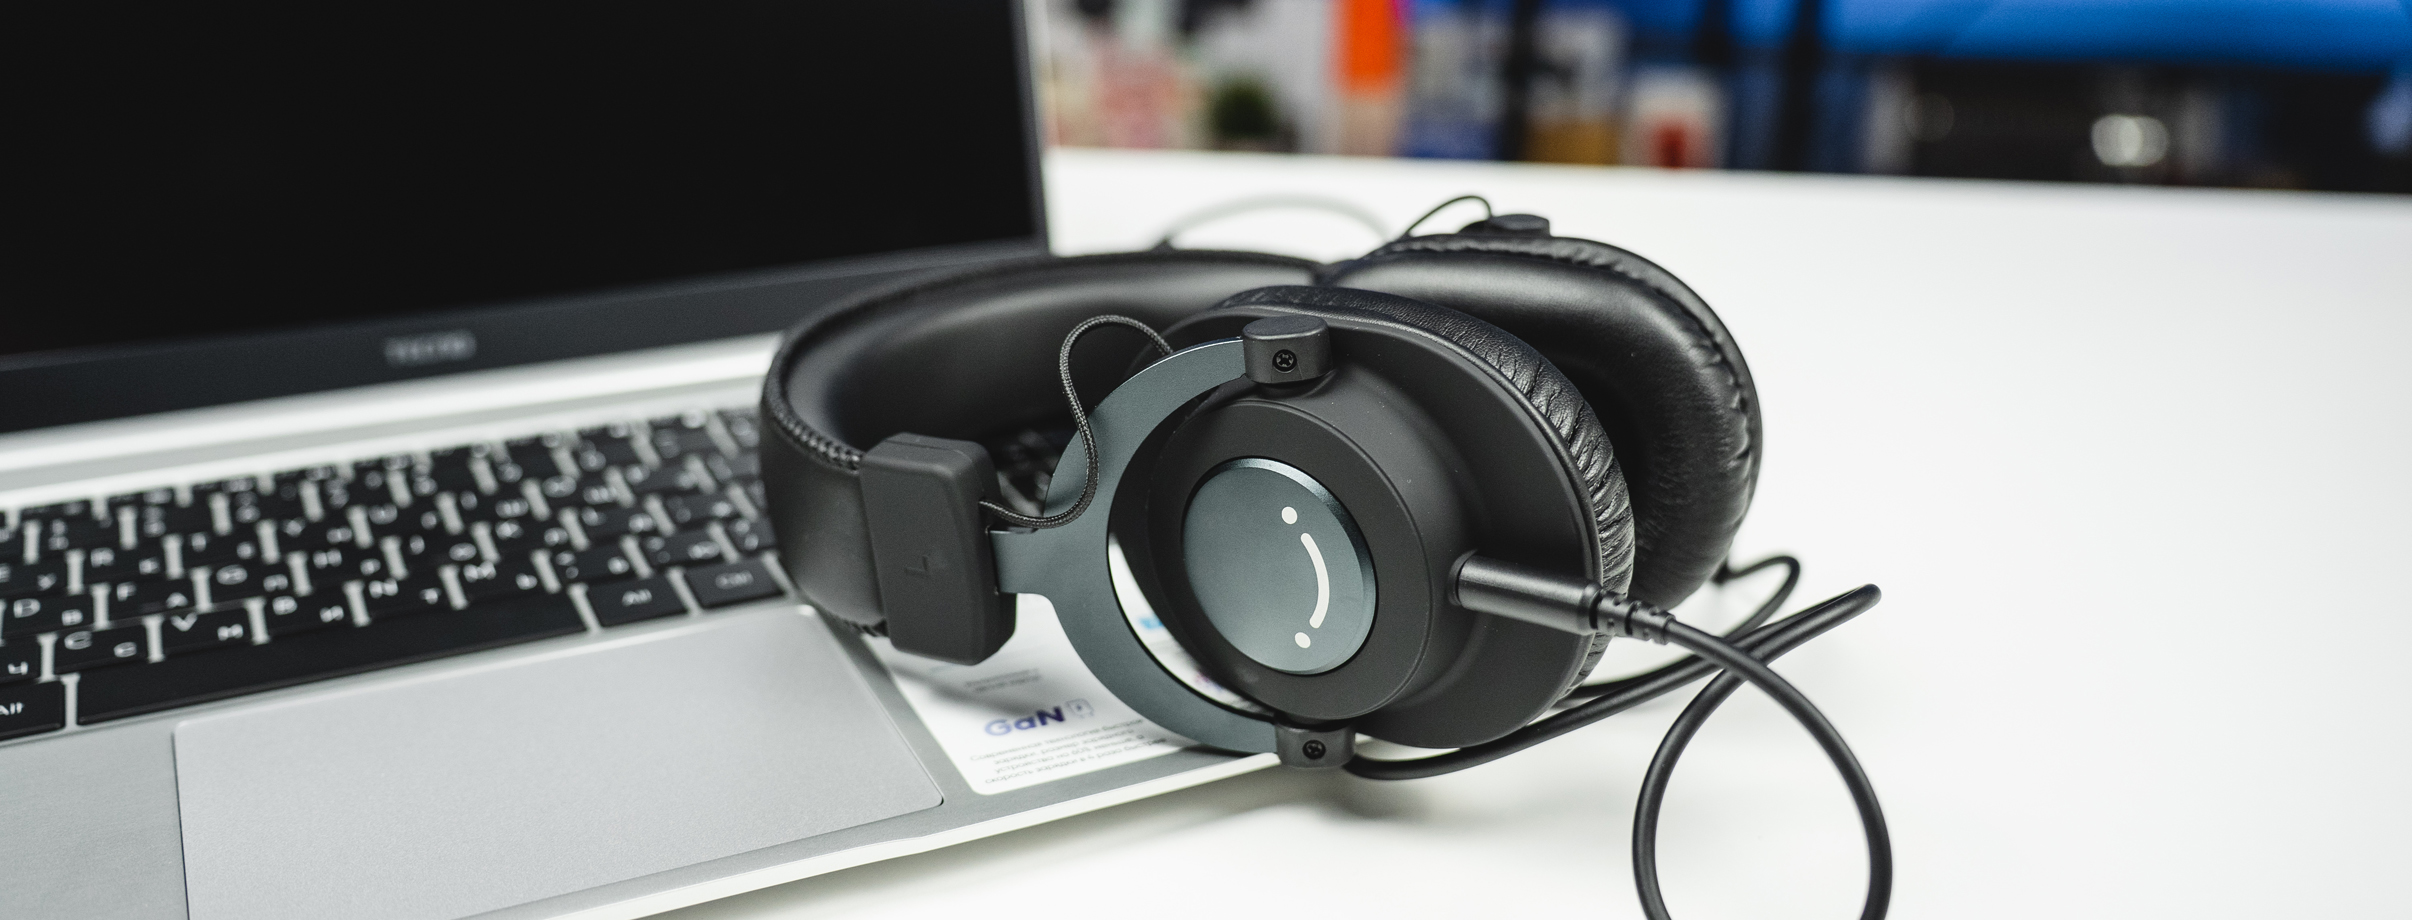 Fifine h6 headset. Fifine a6 наушника. Fifine h8. Fifine h6 наушники. Fifine h6 Dynamic 7.1.